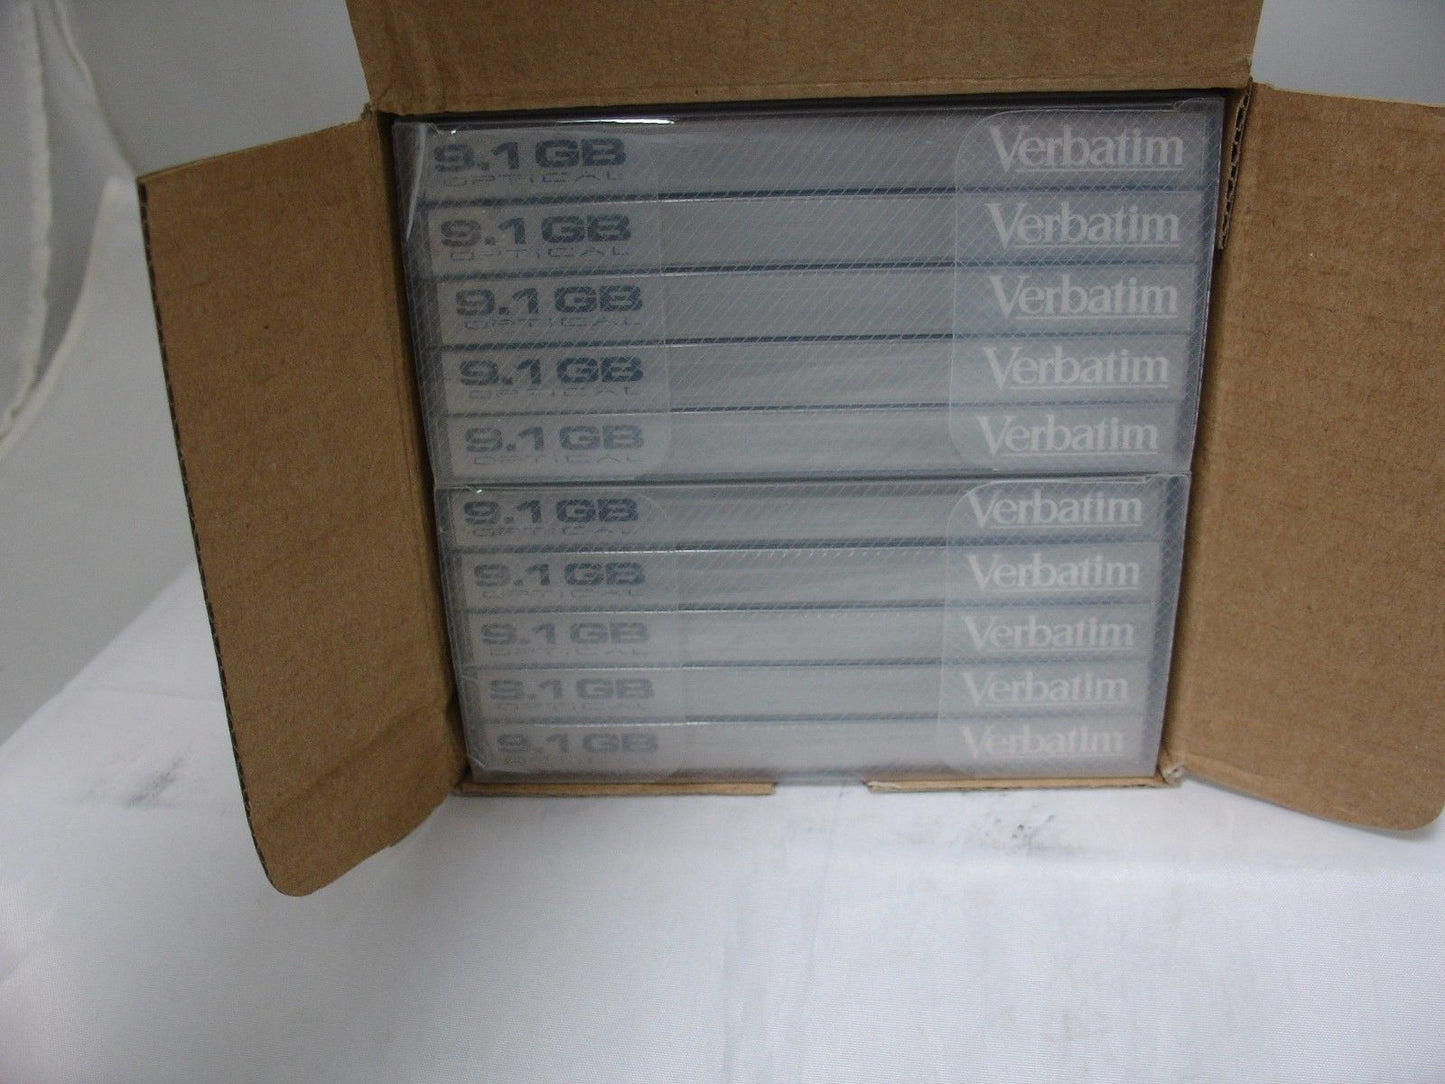 Verbatim 94124 9.1GB WORM Disk 1 Box of 10 pieces  CWO-9100C C7984A - Micro Technologies (yourdrives.com)